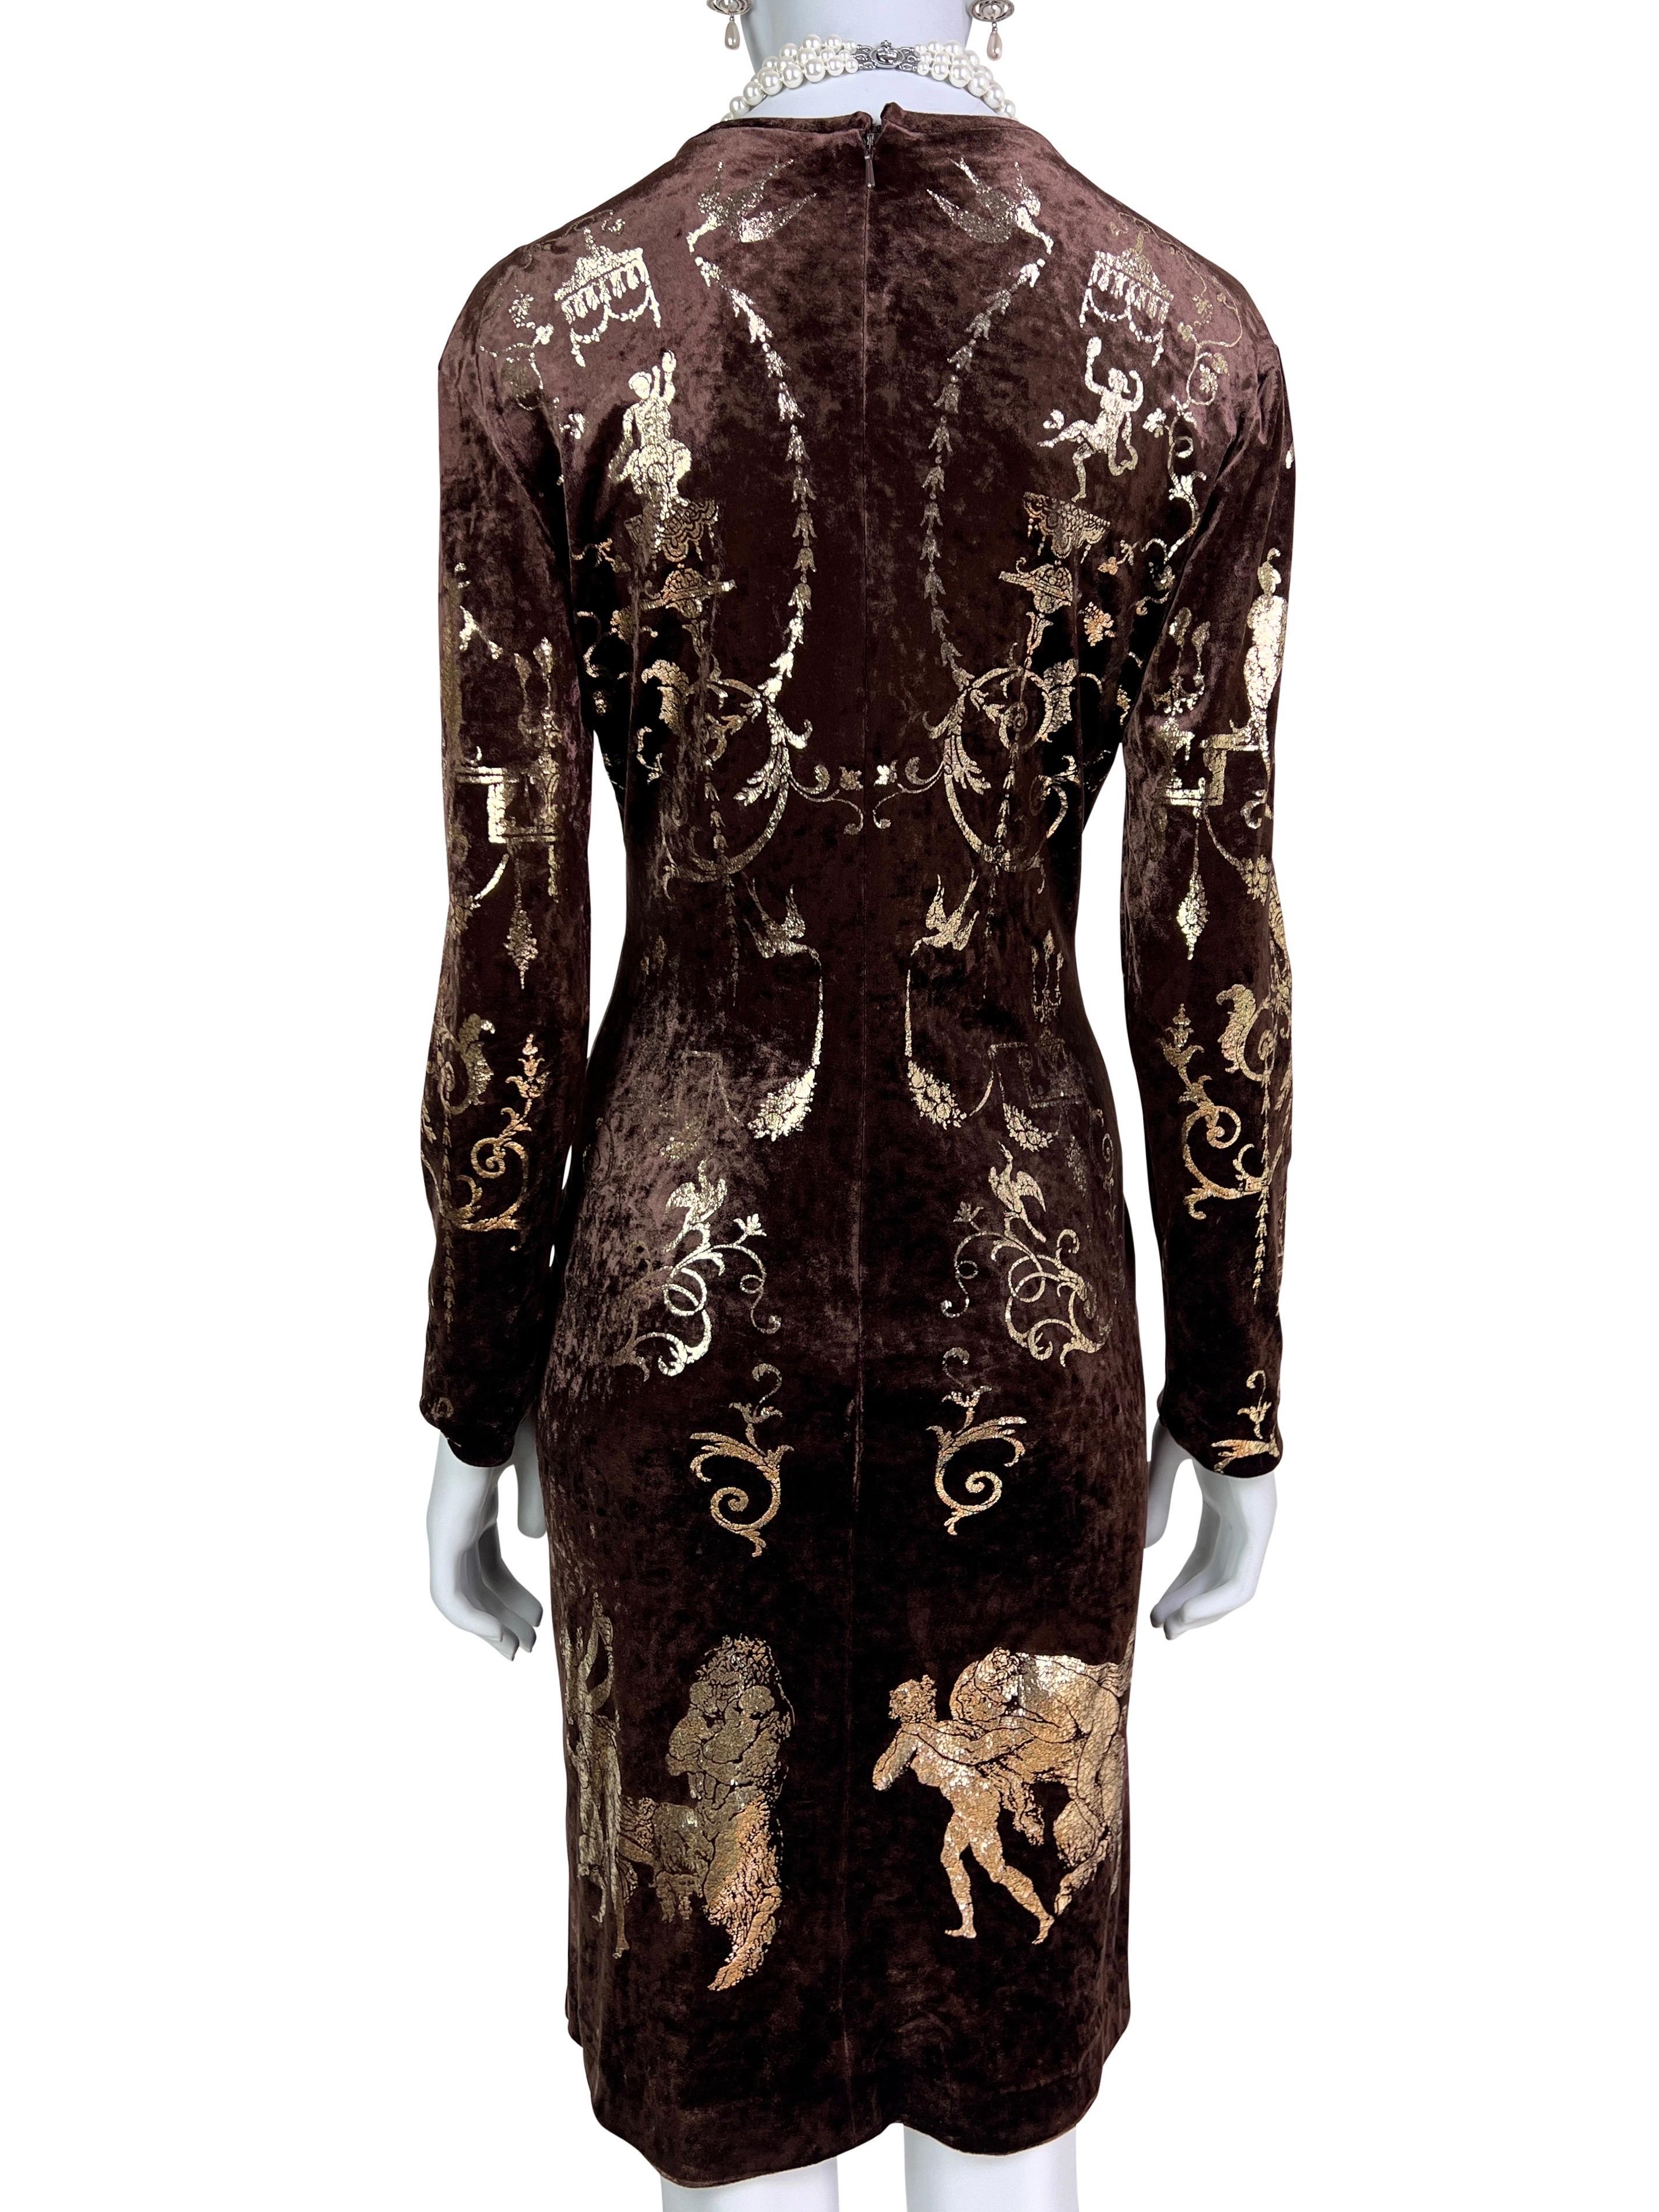 Vivienne Westwood Fall 1990 “Portrait Collection” Foiled “Boulle” Printed Velvet For Sale 12